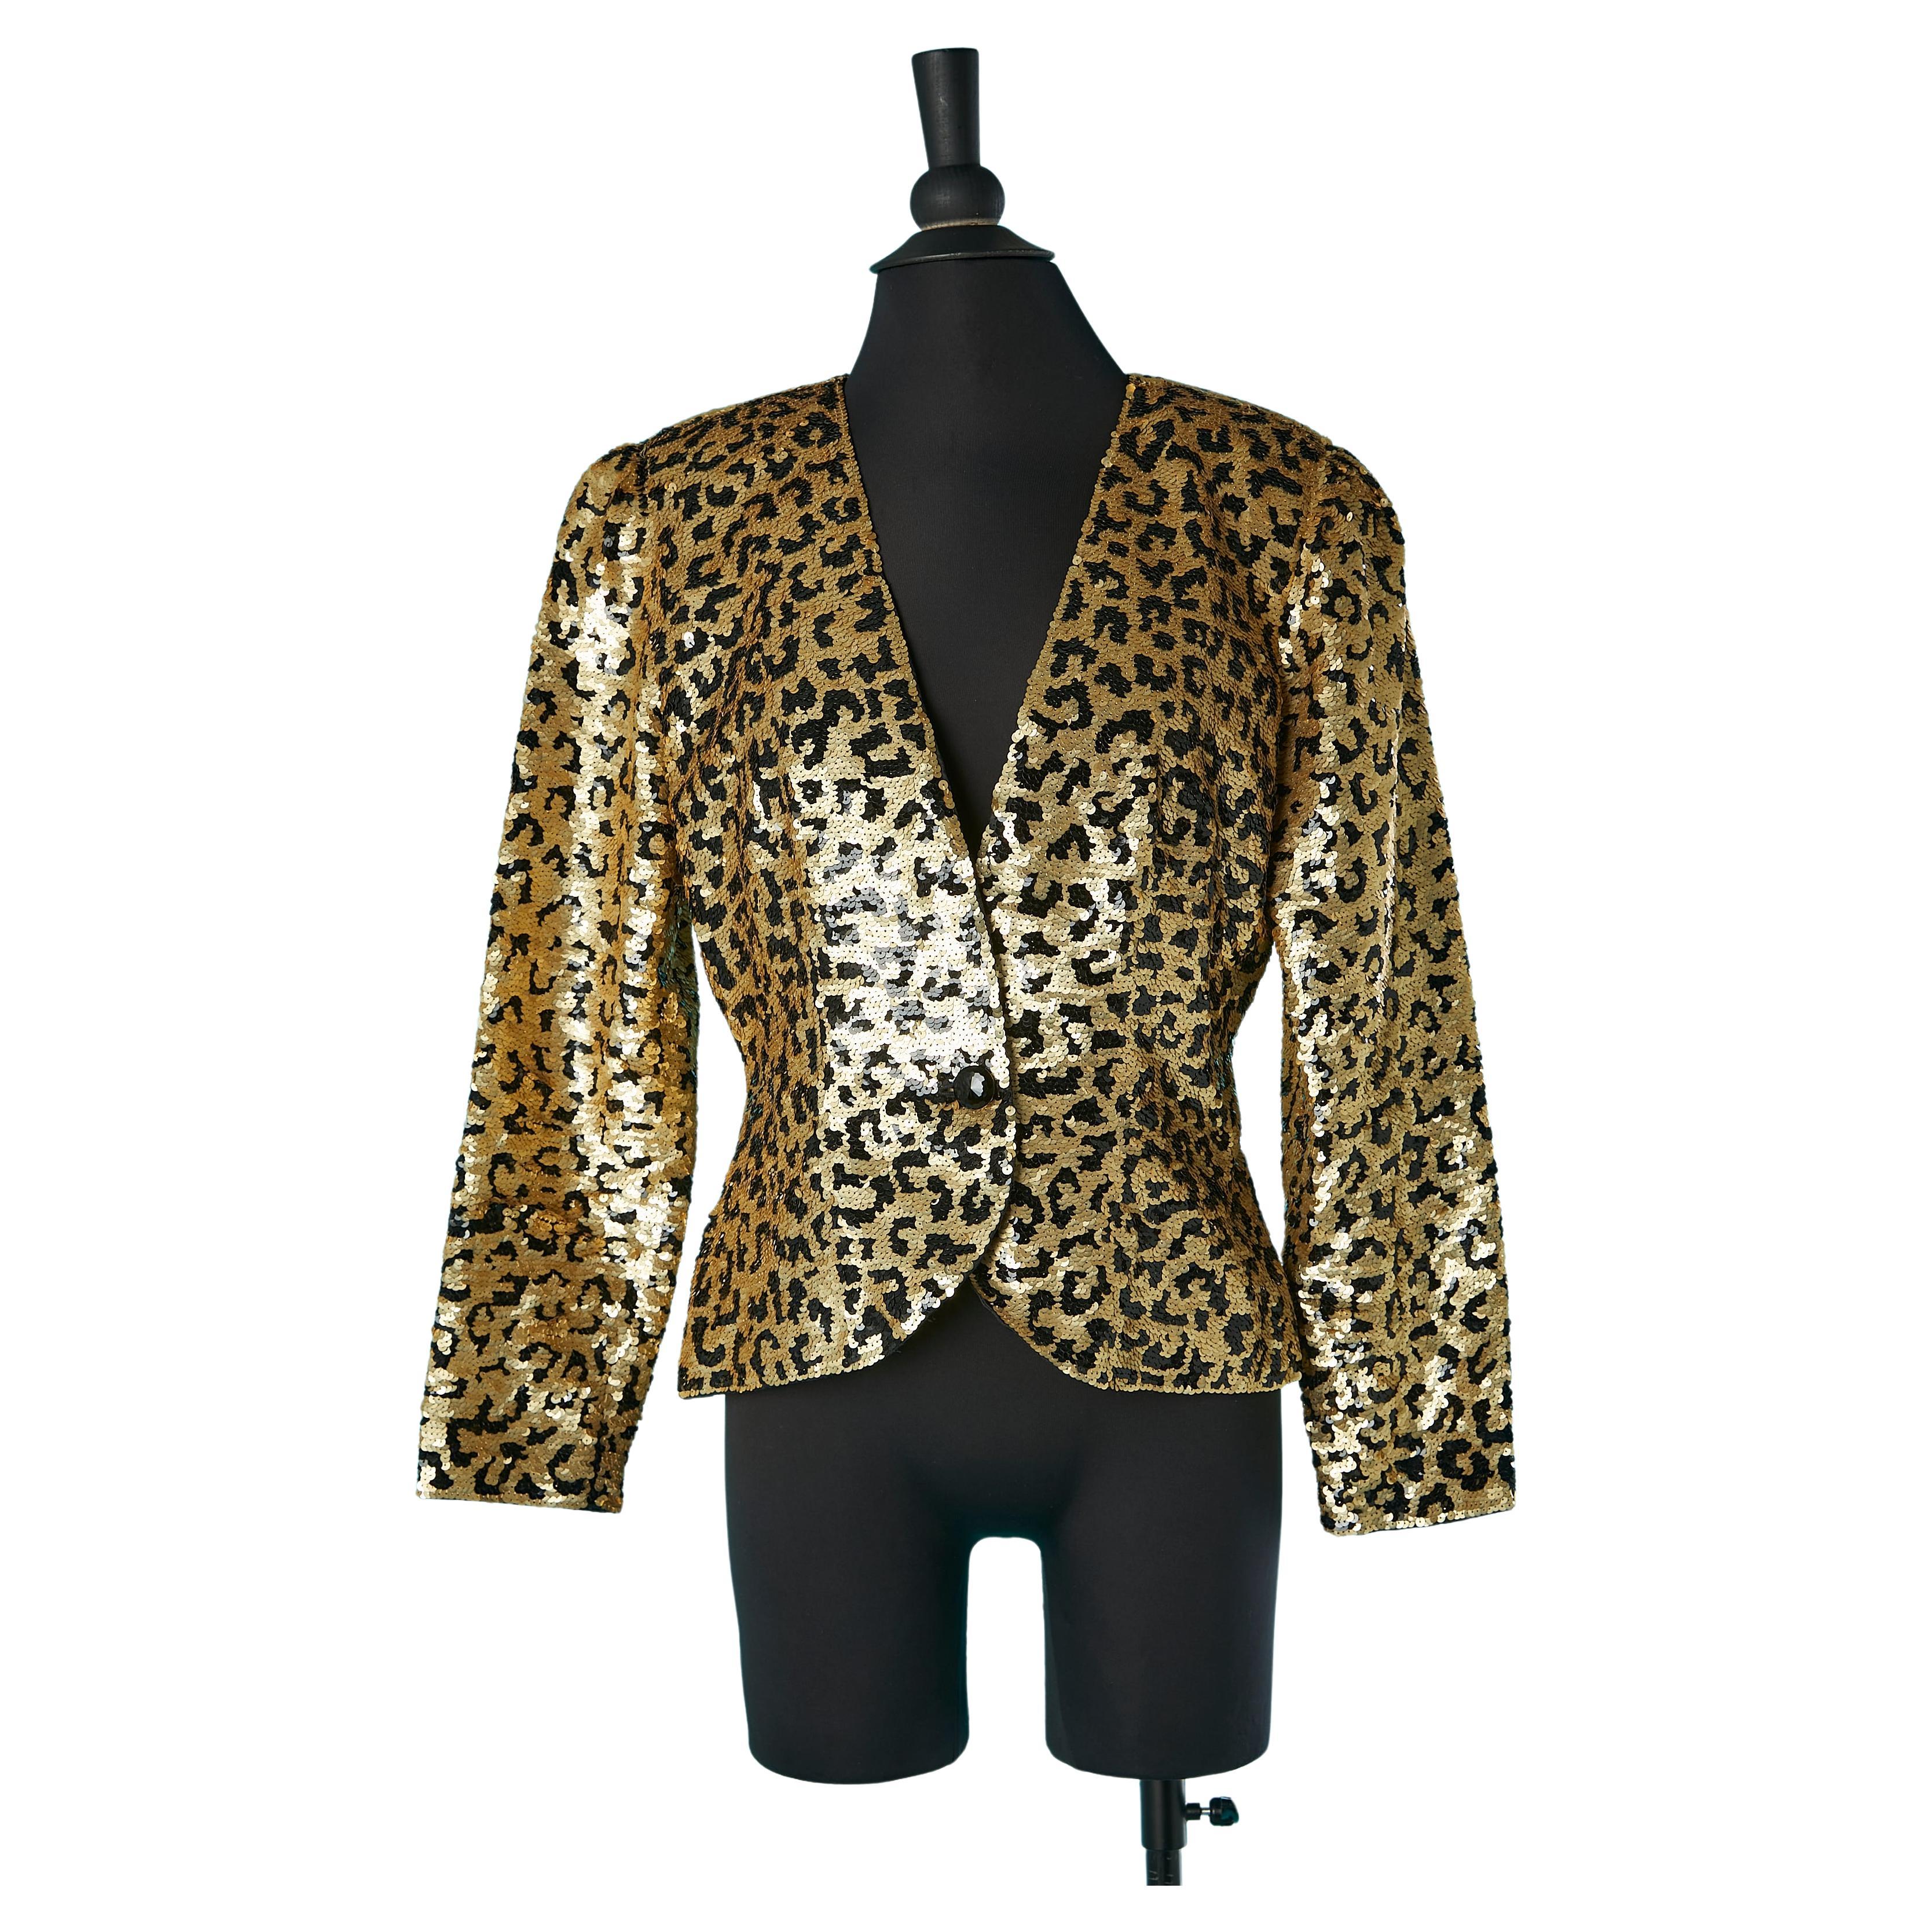 Black and gold sequin evening jacket with animal pattern Black Tie Oleg Cassini  For Sale